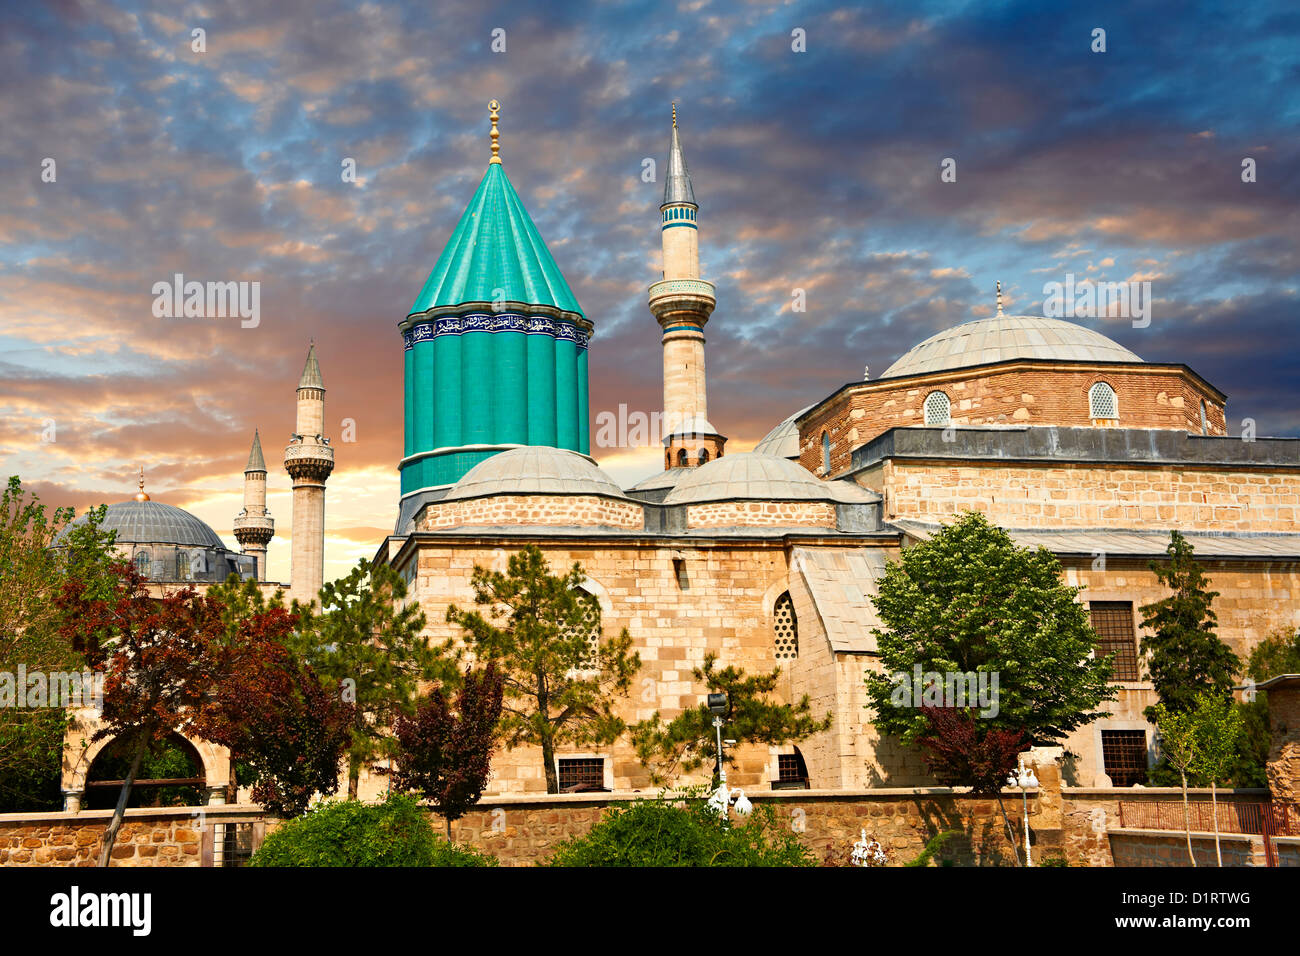 The Mevlâna museum, with the blue domed mausoleum of Jalal ad-Din Muhammad Rumi, Konya, Turkey Stock Photo